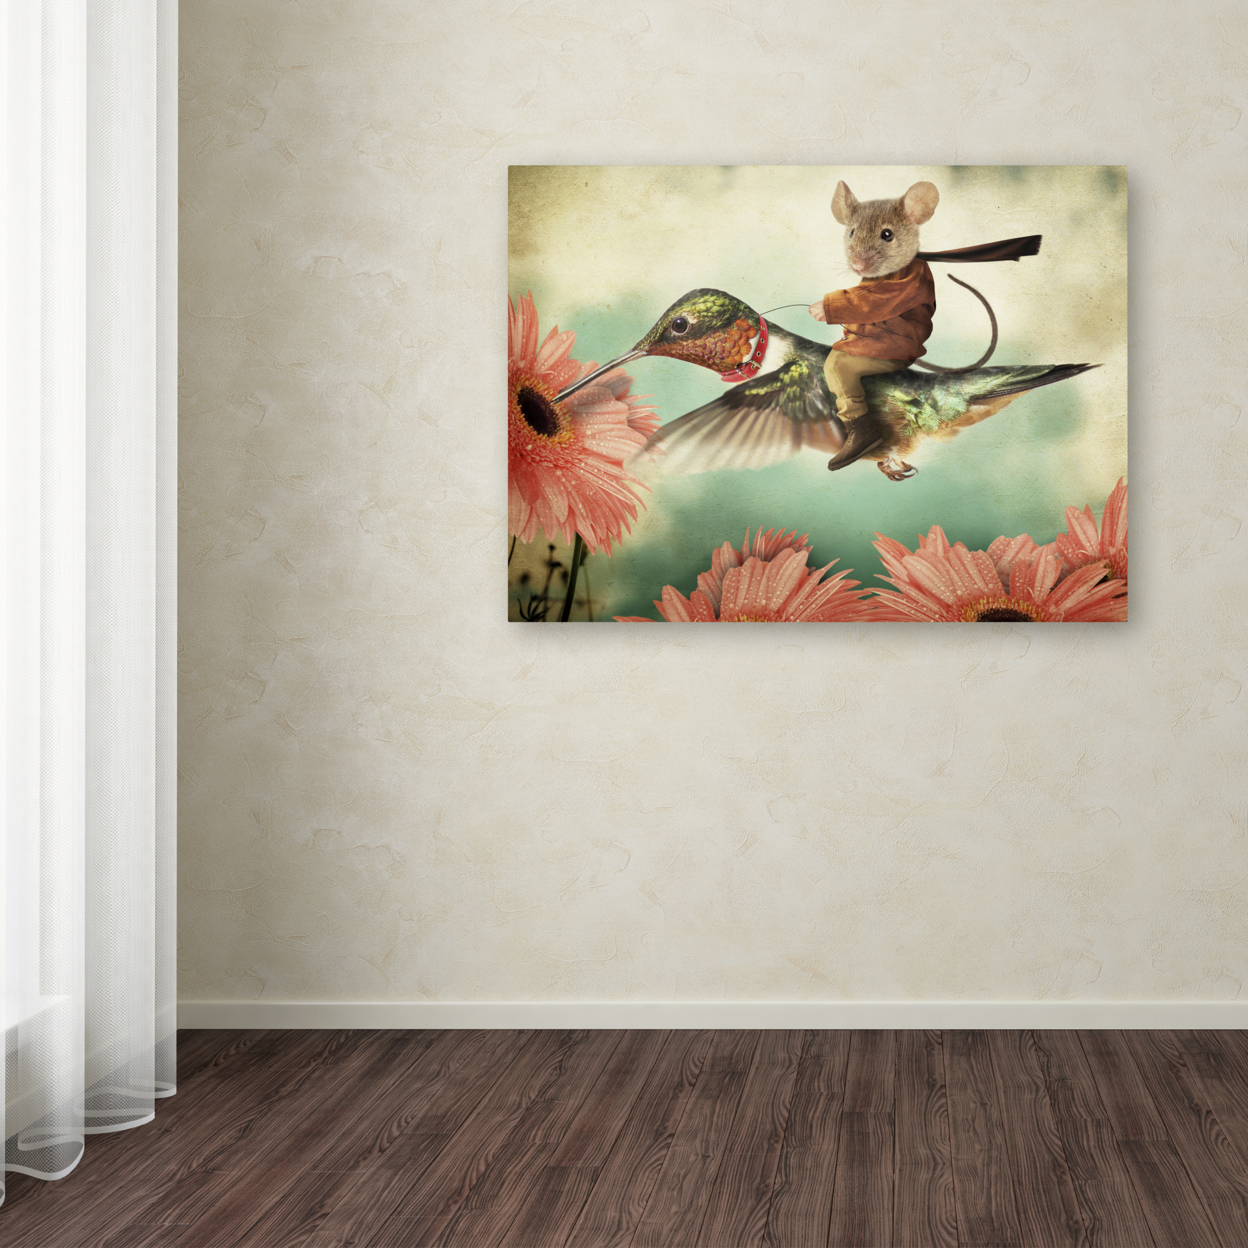 J Hovenstine Studios 'Catching A Ride On A Hummingbird' Canvas Wall Art 35 X 47 Inches